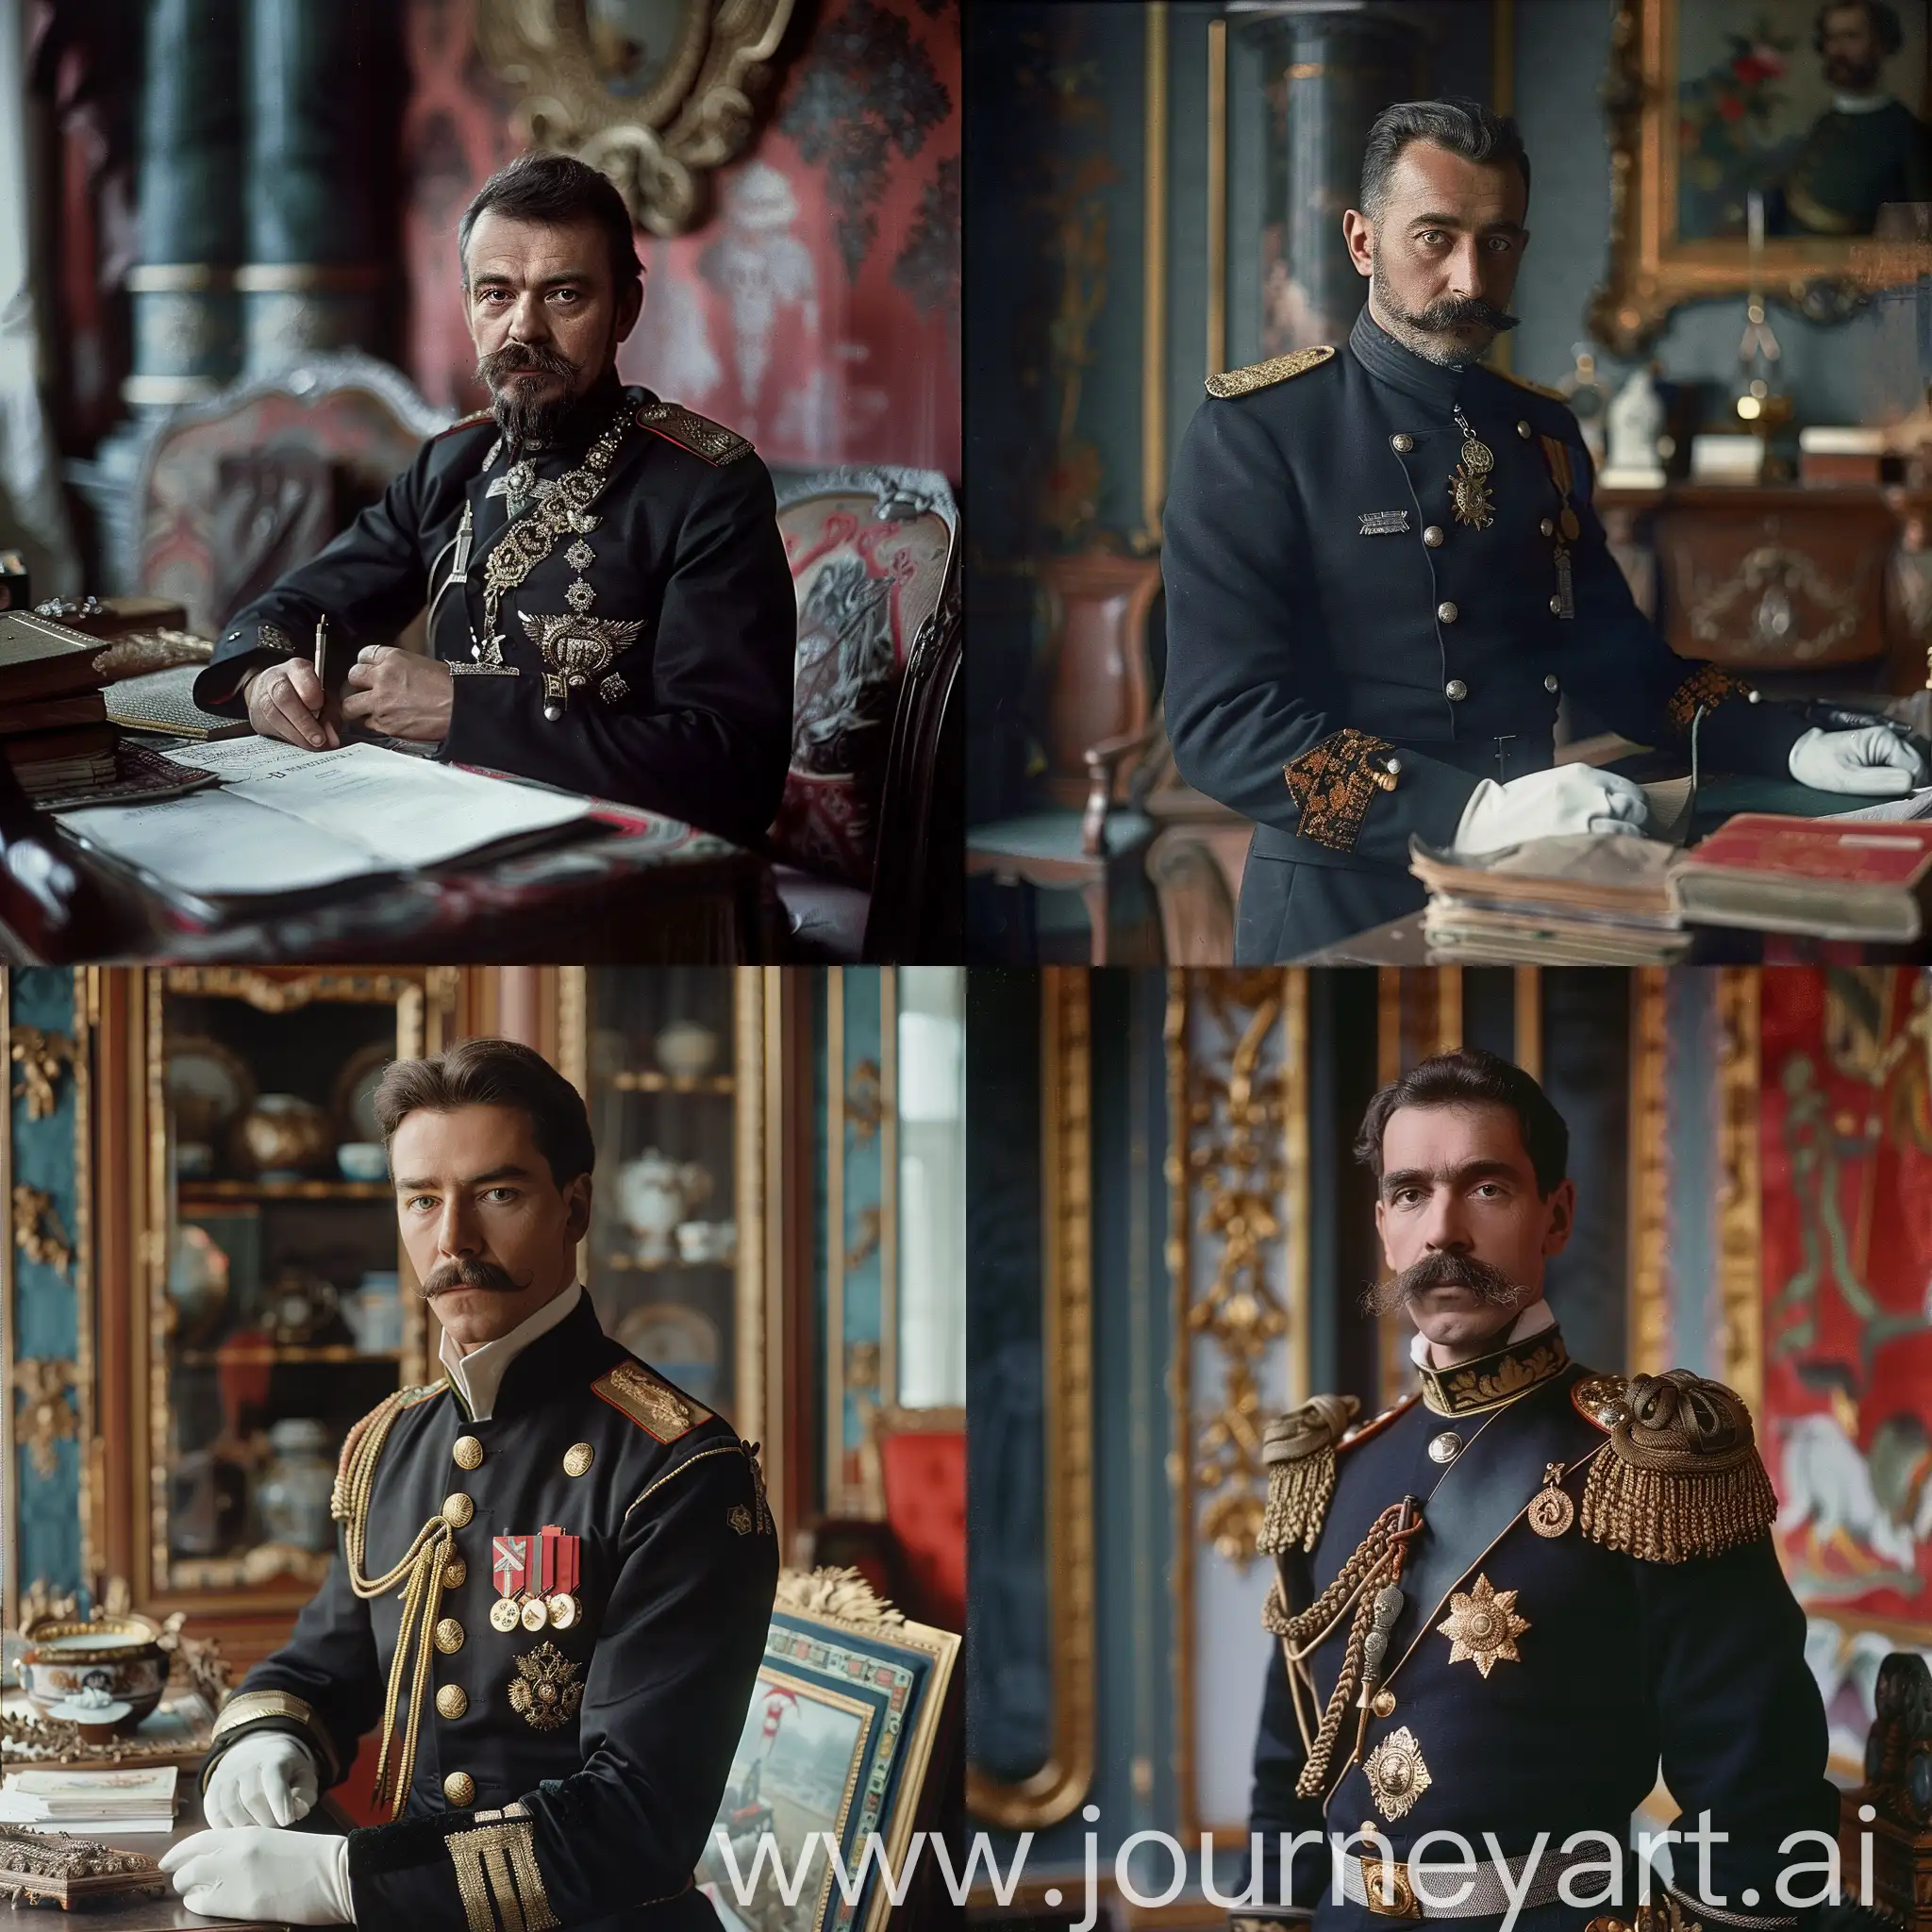 Tsarist-Official-in-Imperial-Russia-Portrait